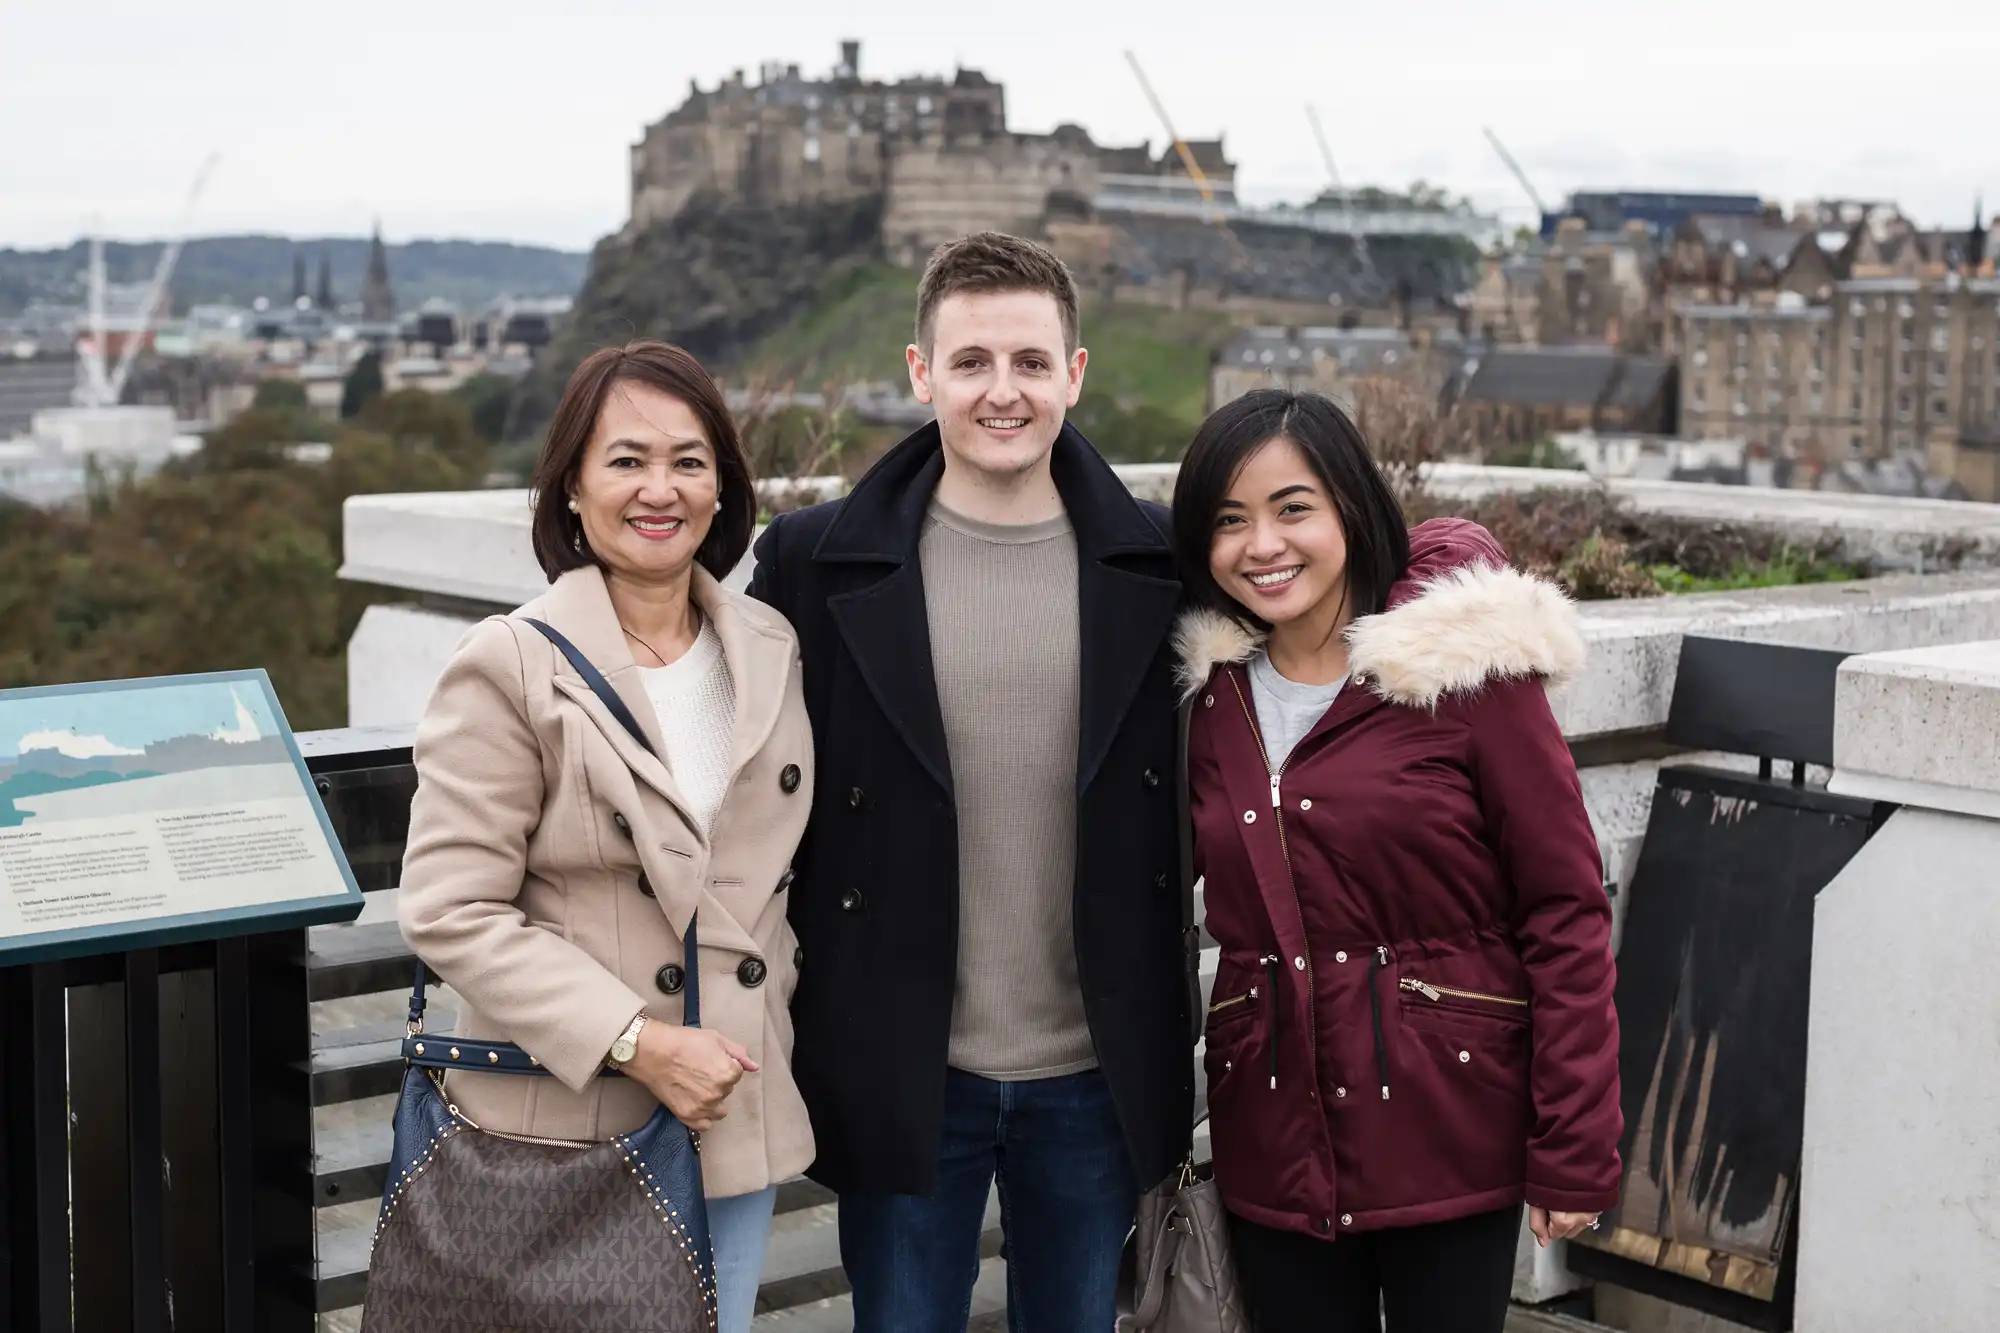 Three people smiling at the camera with edinburgh castle in the background. two women and one man stand together, dressed in warm clothing.